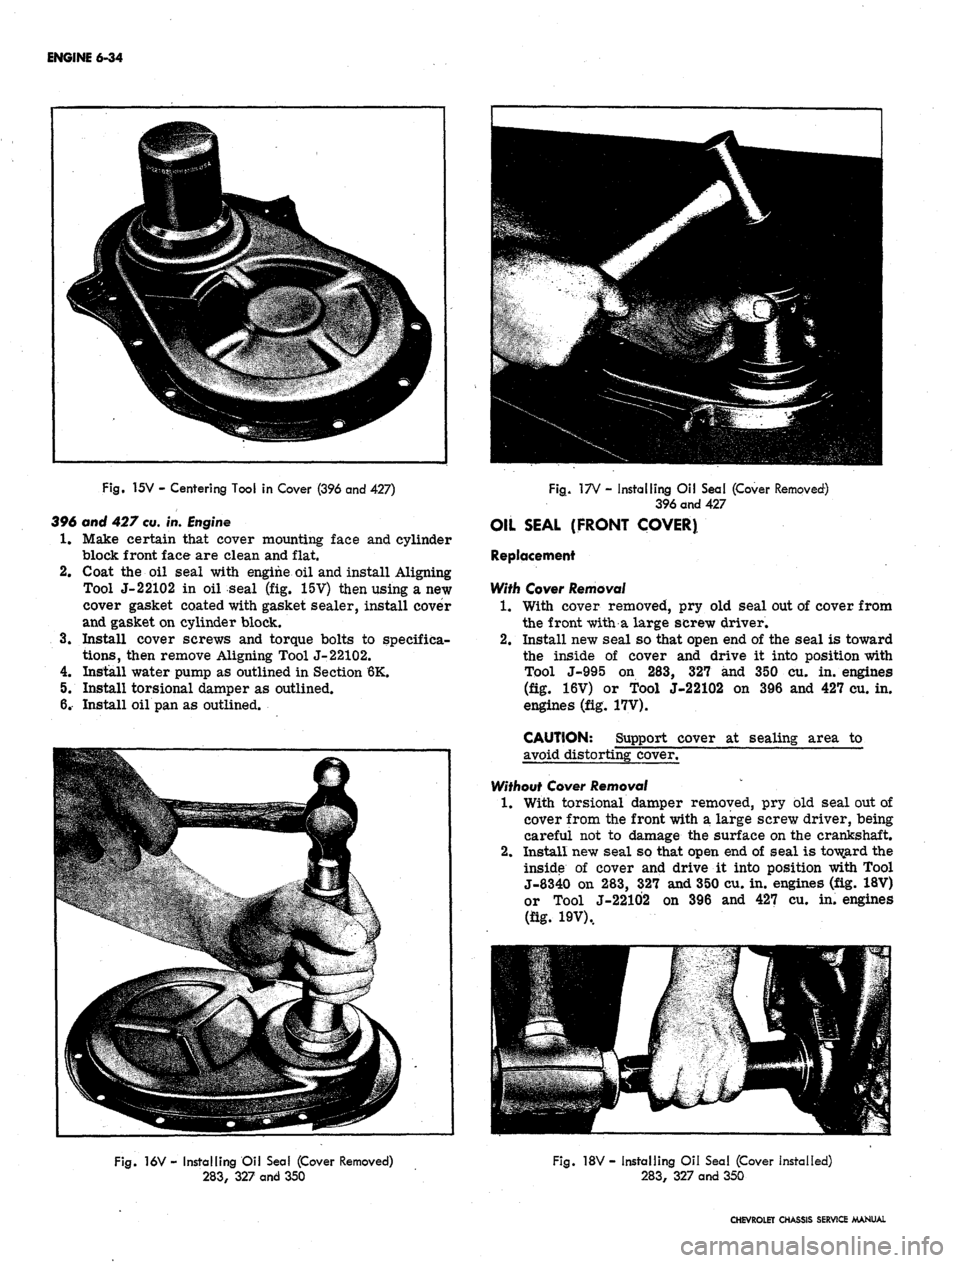 CHEVROLET CAMARO 1967 1.G Chassis Workshop Manual 
ENGINE 6-34

Fig.
 15V - Centering Tool in Cover (396 and 427)

396 and 427
 cu.
 in.
 Engine

1.
 Make certain that cover mounting face and cylinder

block front face are clean and flat.

2.
 Coat t